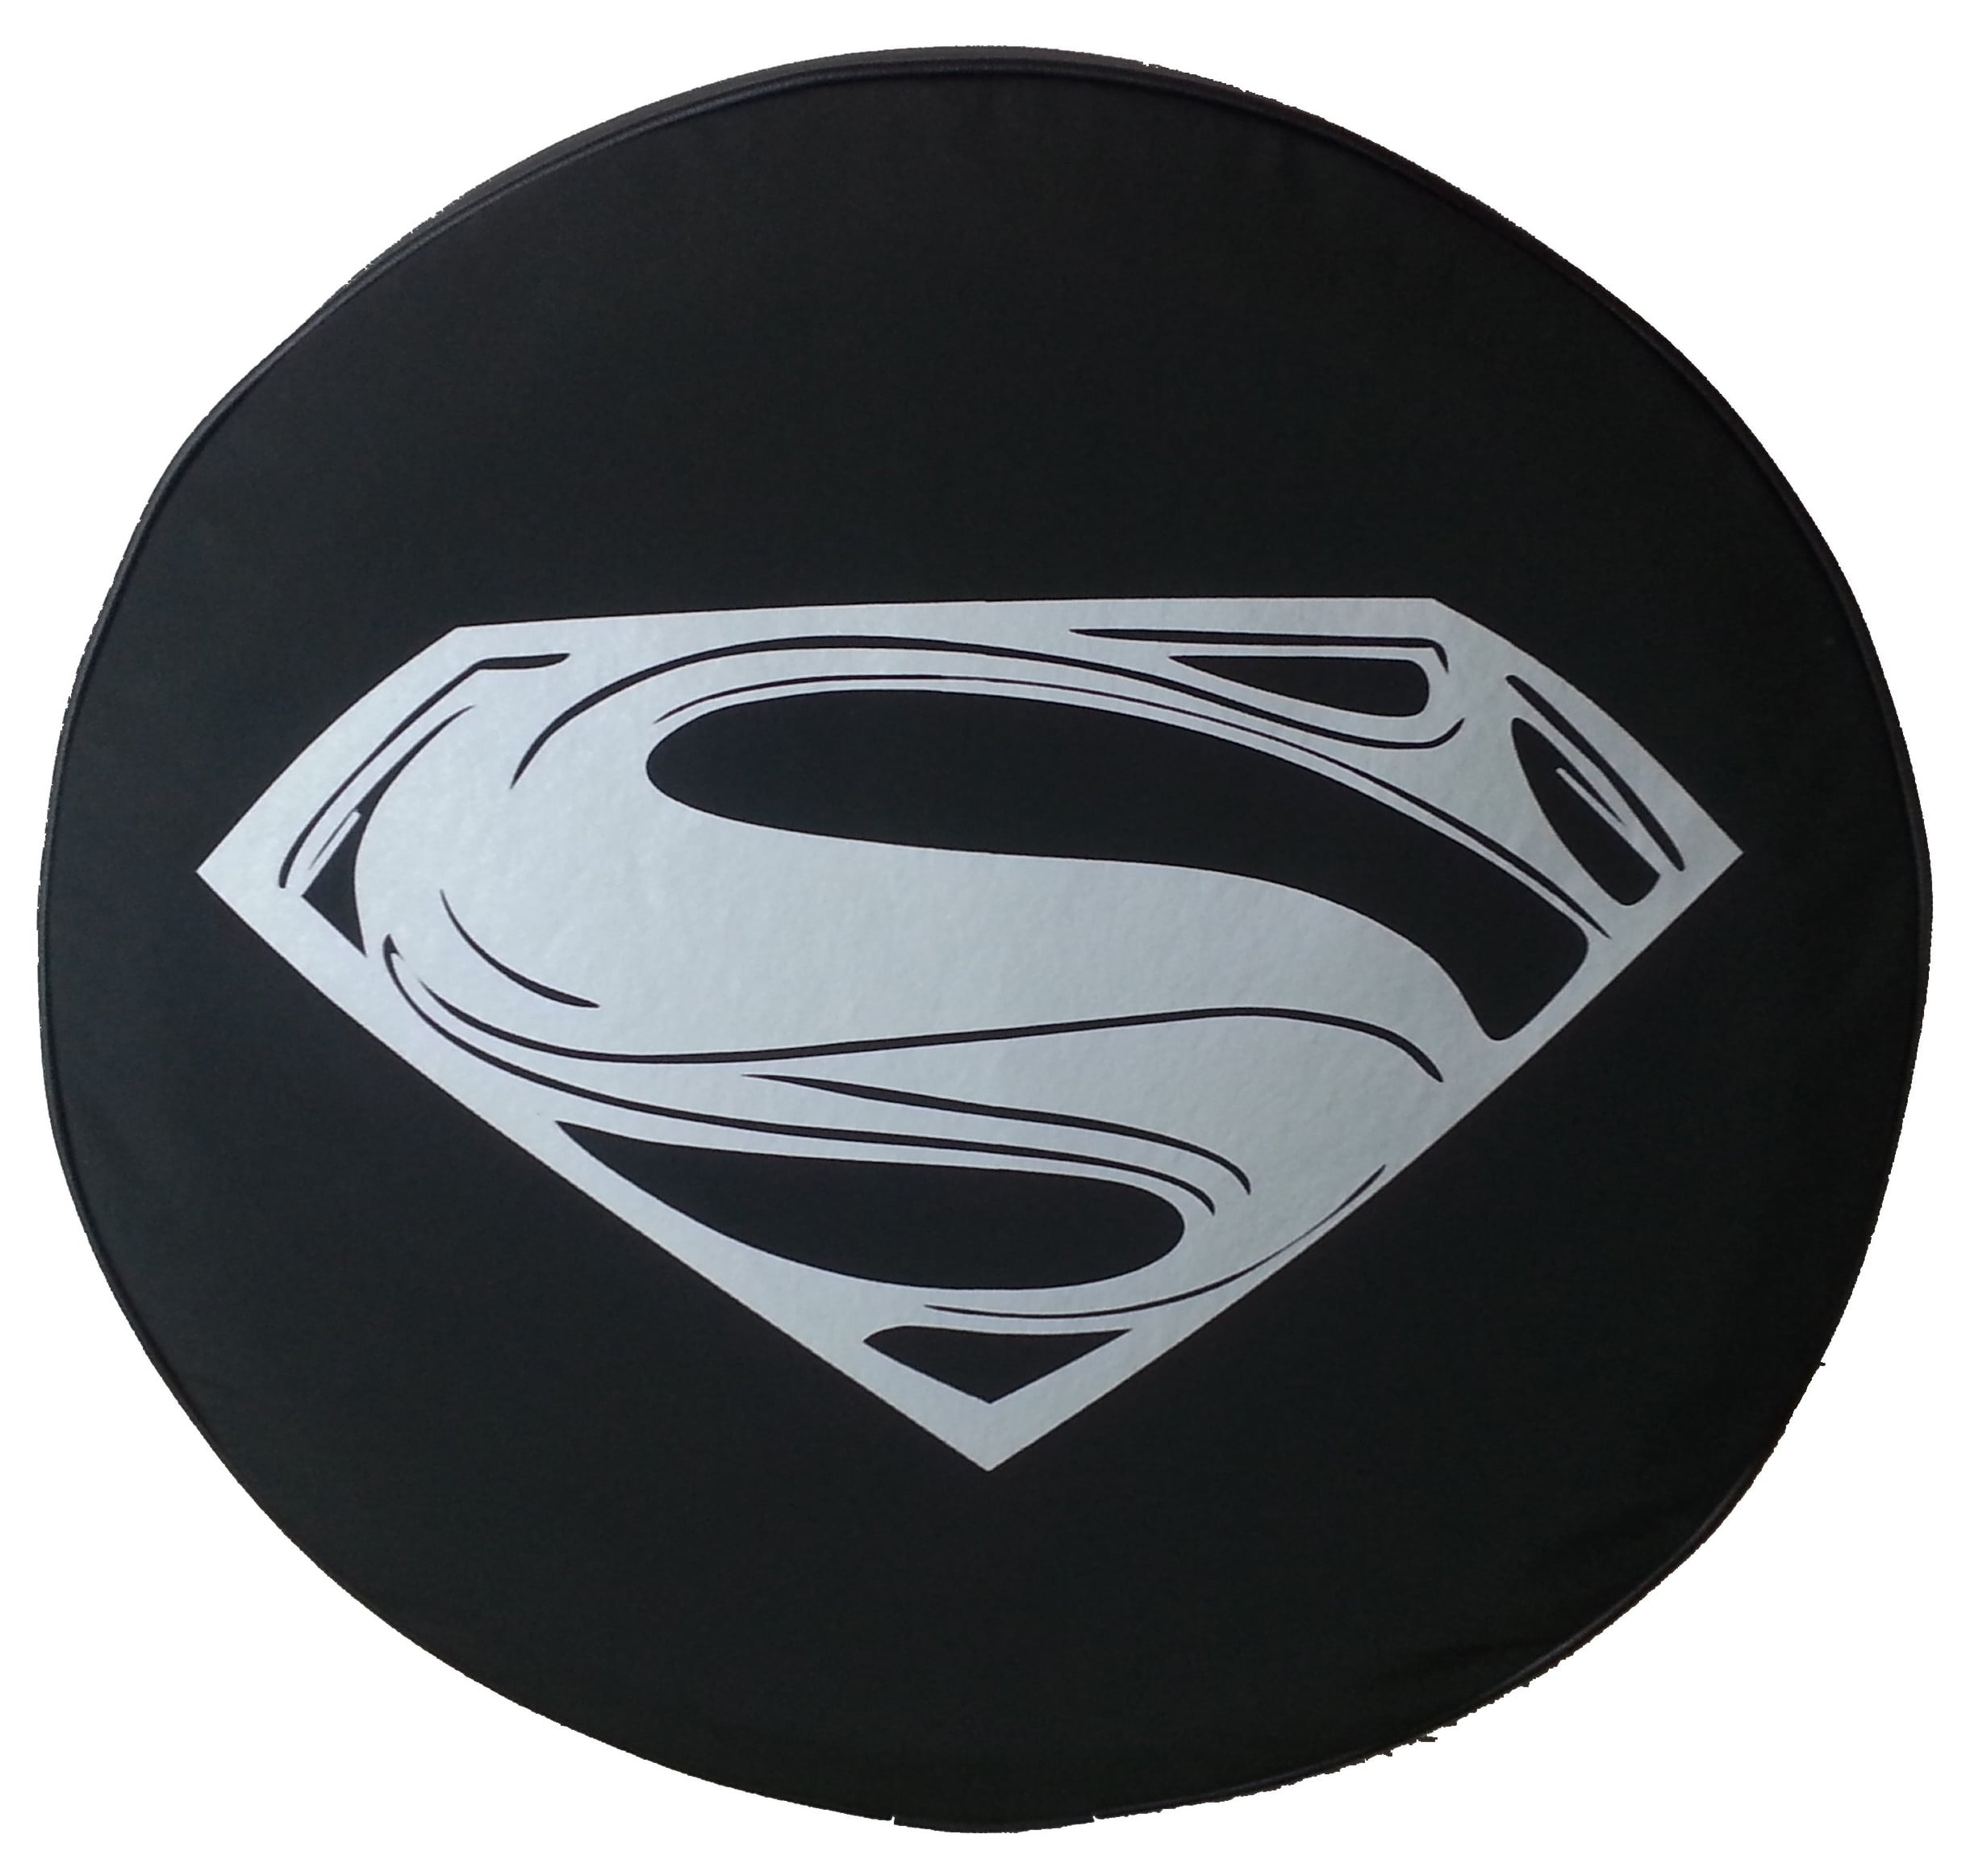 ASLGlicenseplateframeFG Custom Tire Cover Universal Spare Tire Cover Fit for RV,SUV,Trailer and Many Vehicle 